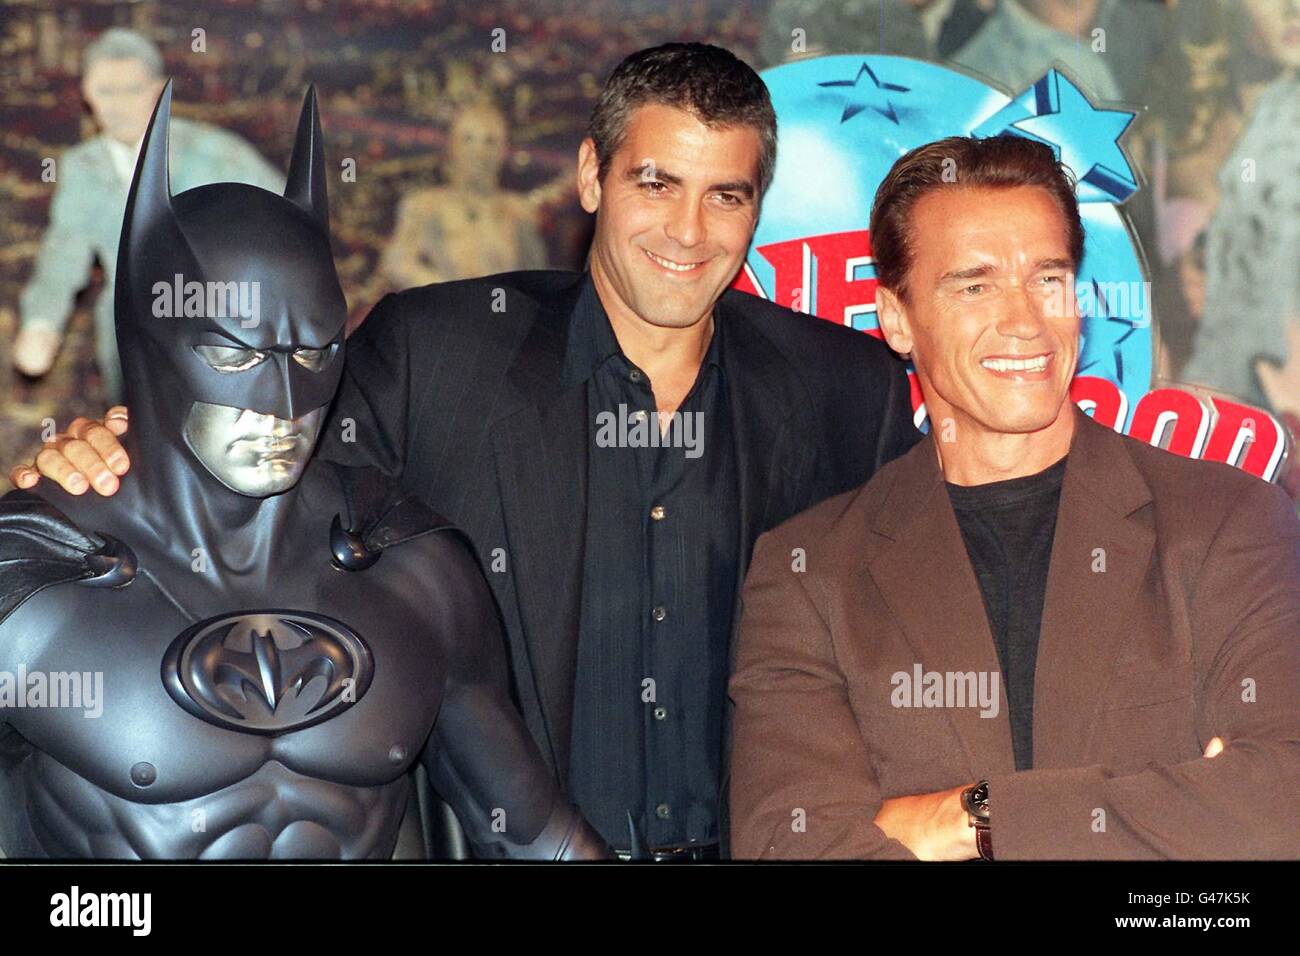 Heart throb American actor, George Clooney (left), and action movie hero, Arnold Schwartzenegger at Planet Hollywood, in London today (Monday), promoting their latest Batman movie. Clooney plays the title role with Schwartzenegger playing Mr Freeze. Photo by Stefan Rousseau/PA. see PA story SHOWBIZ Battersea. Stock Photo